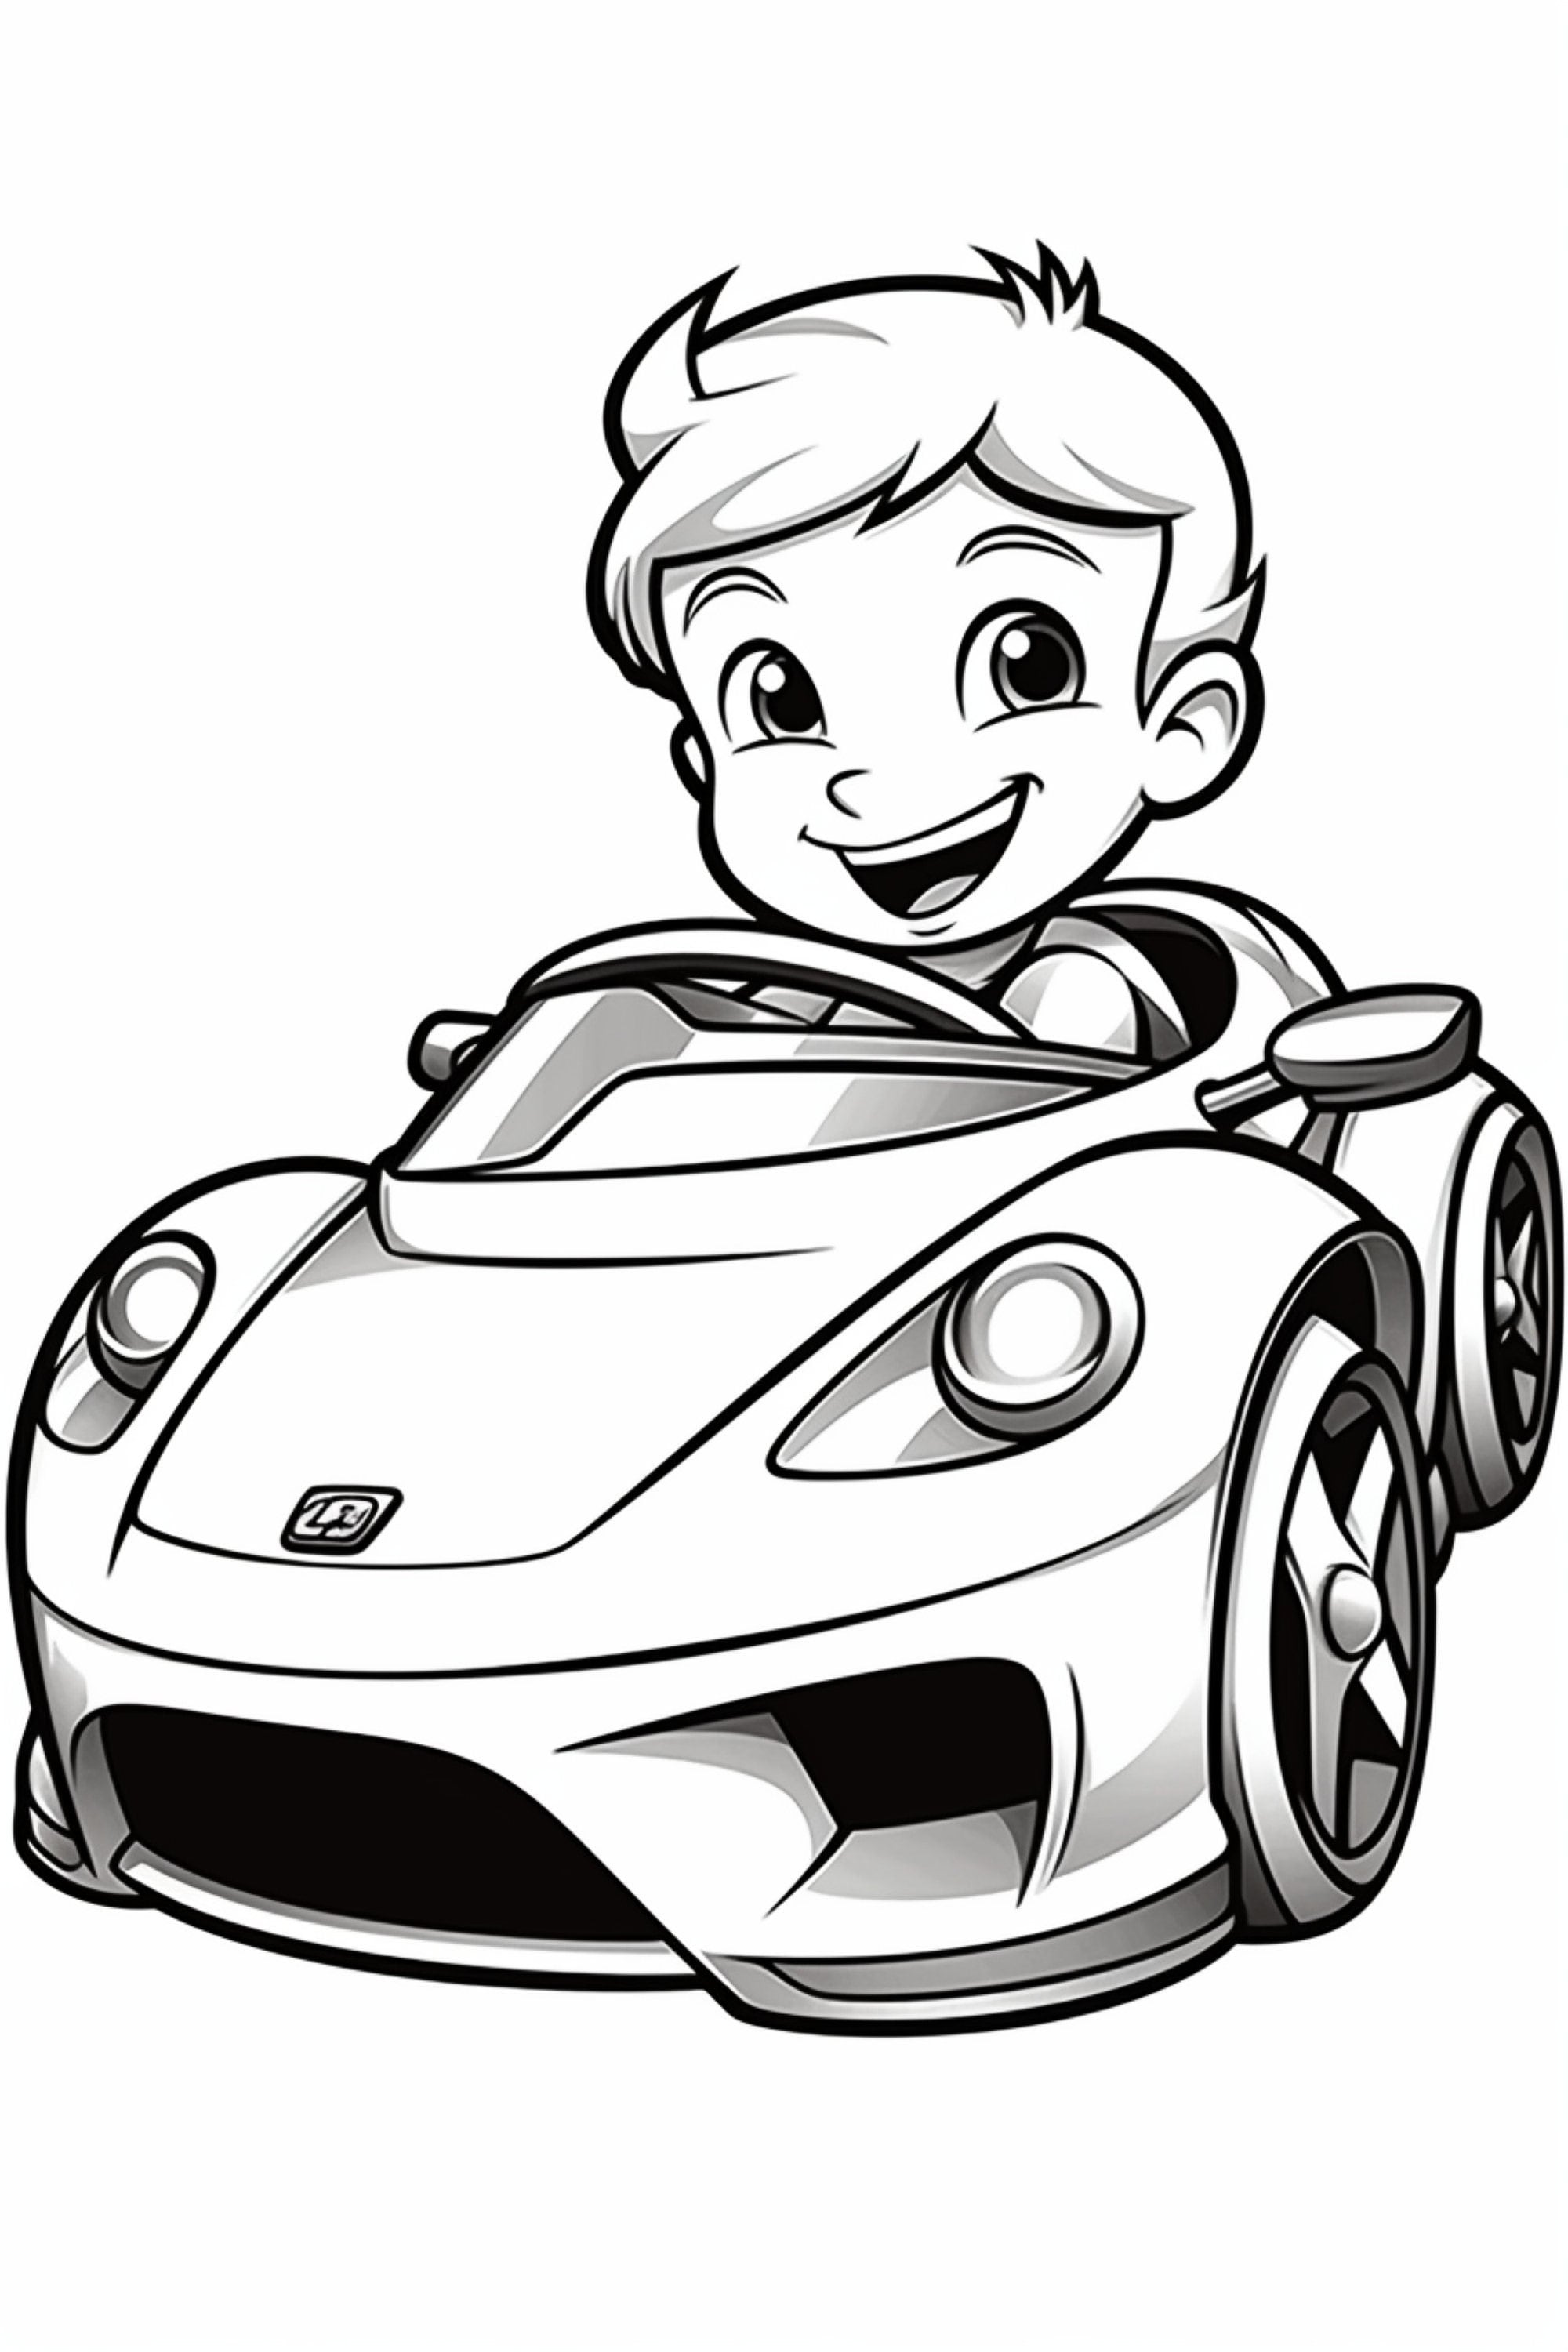 Race car coloring pages instant download